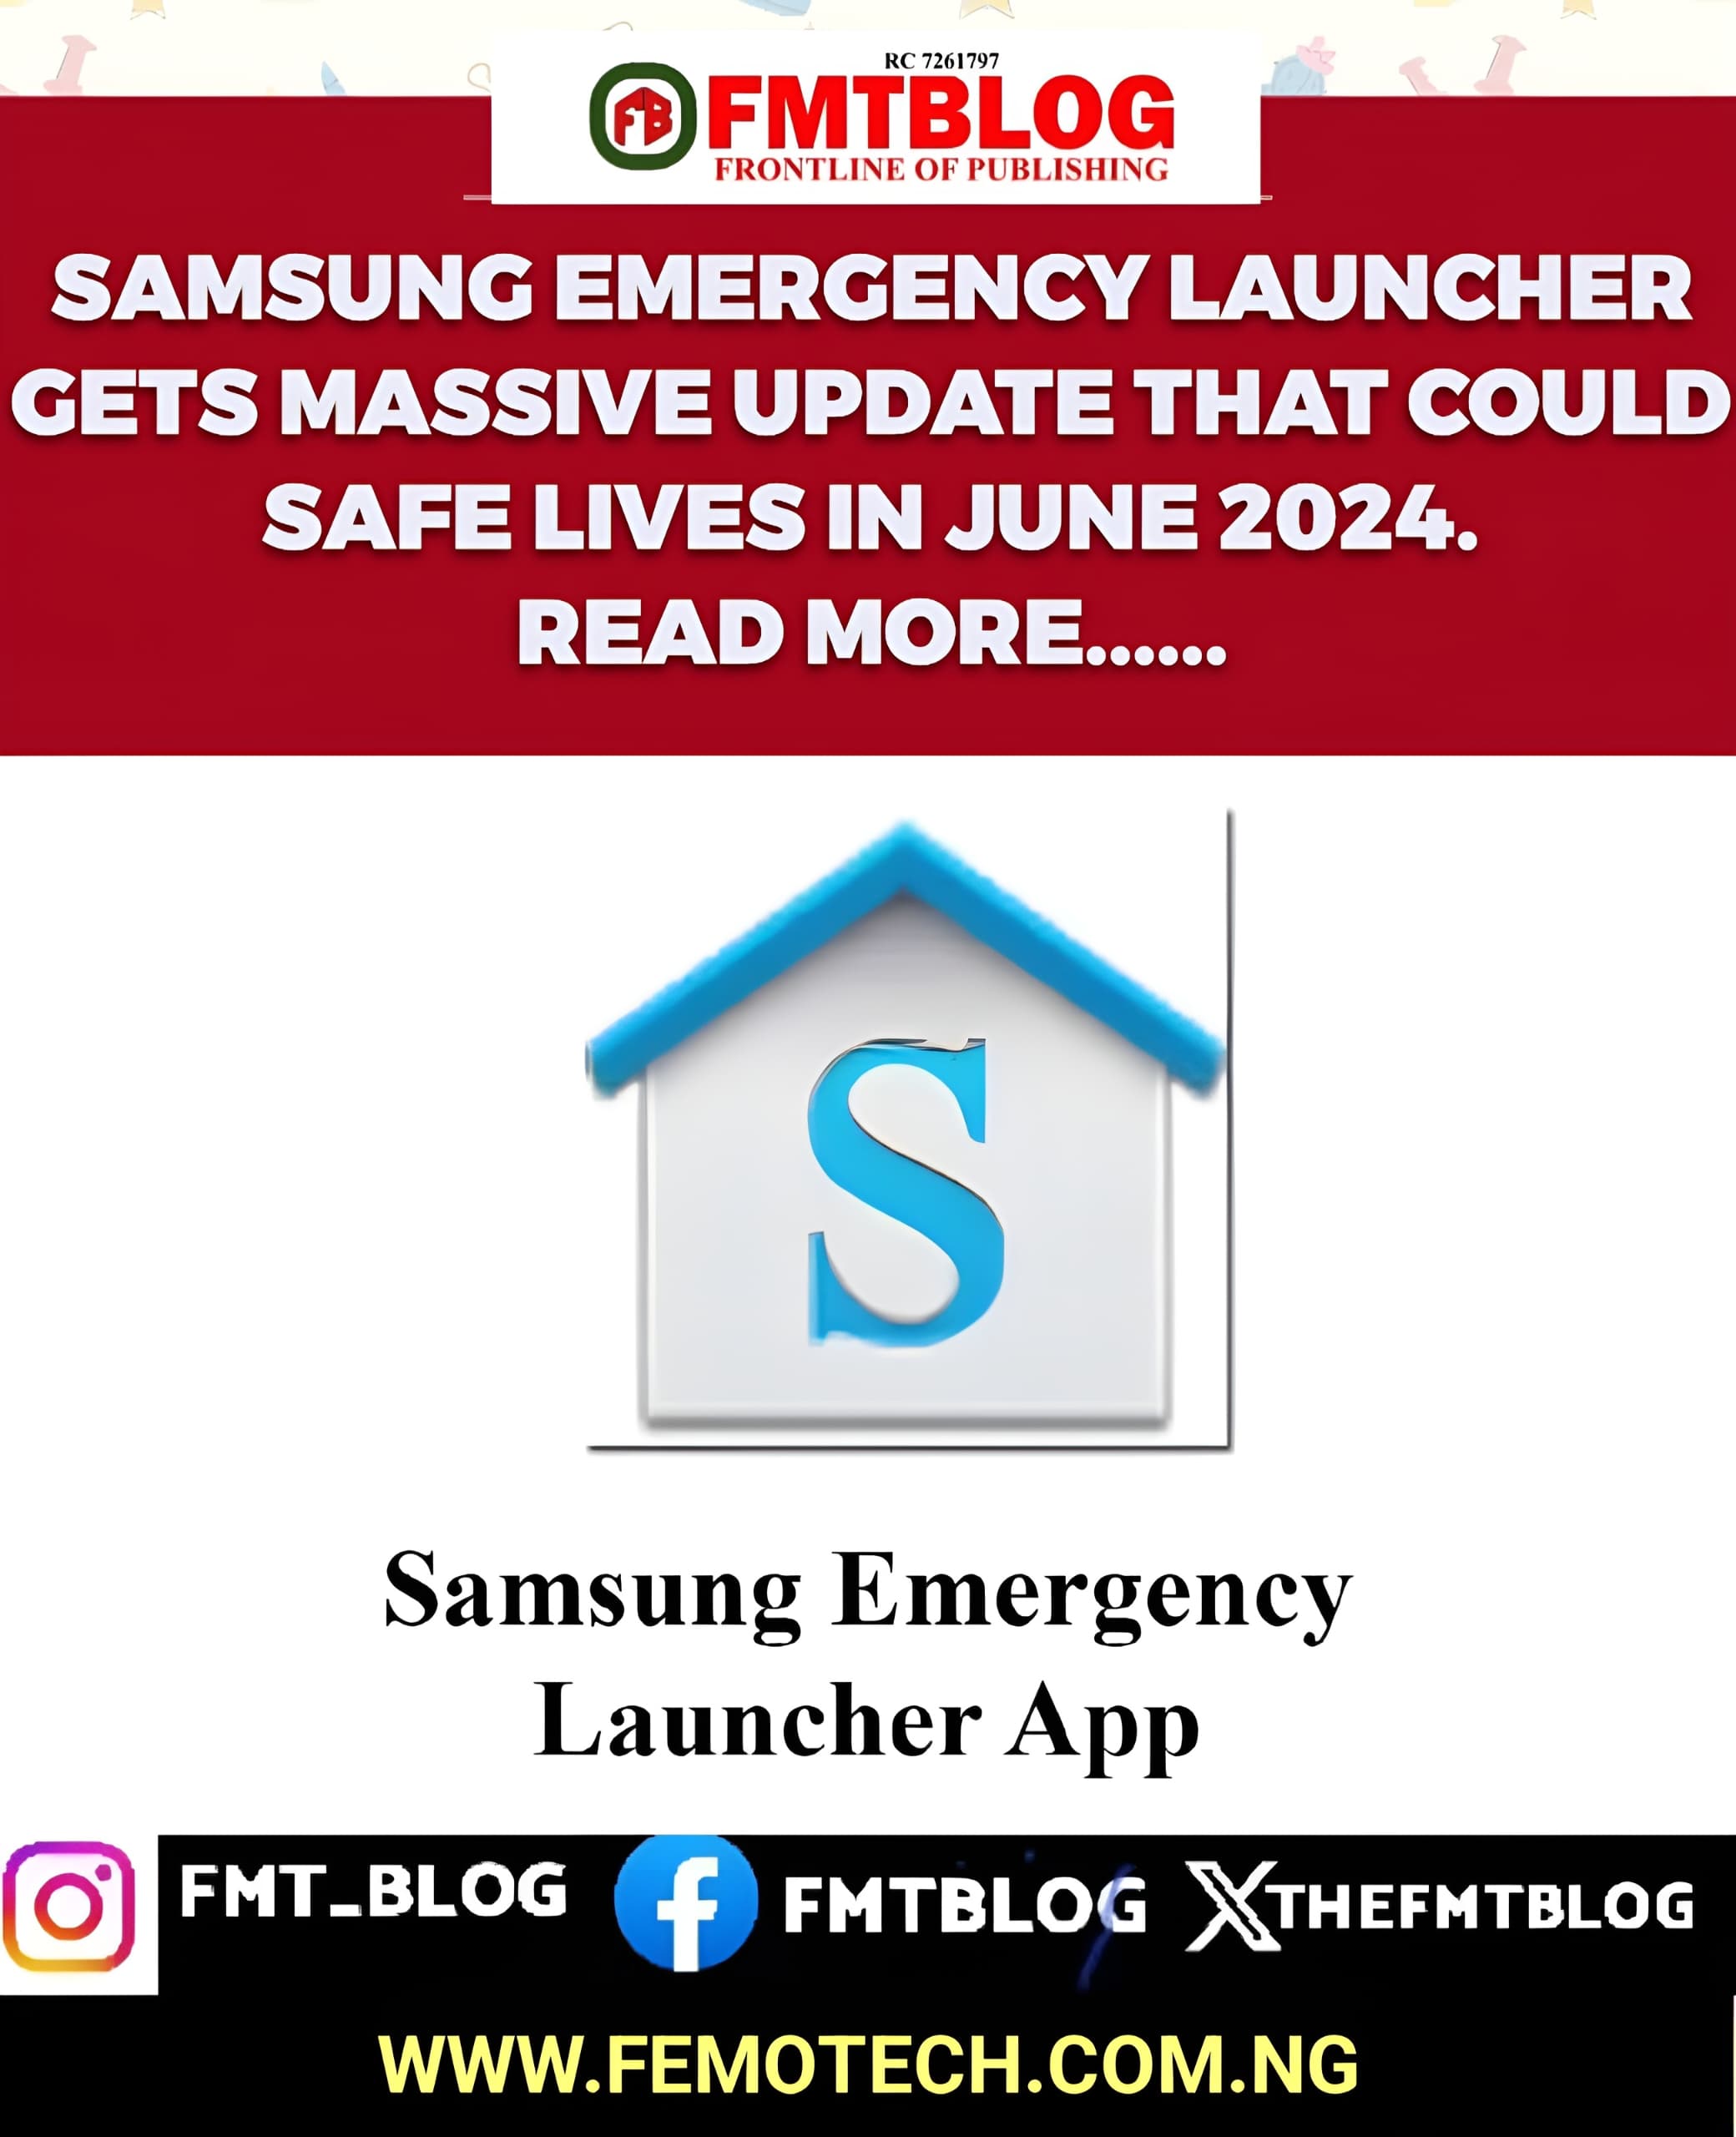 Samsung Emergency Launcher Gets Massive Update That Could Safe Lives In June 2024: Download Now